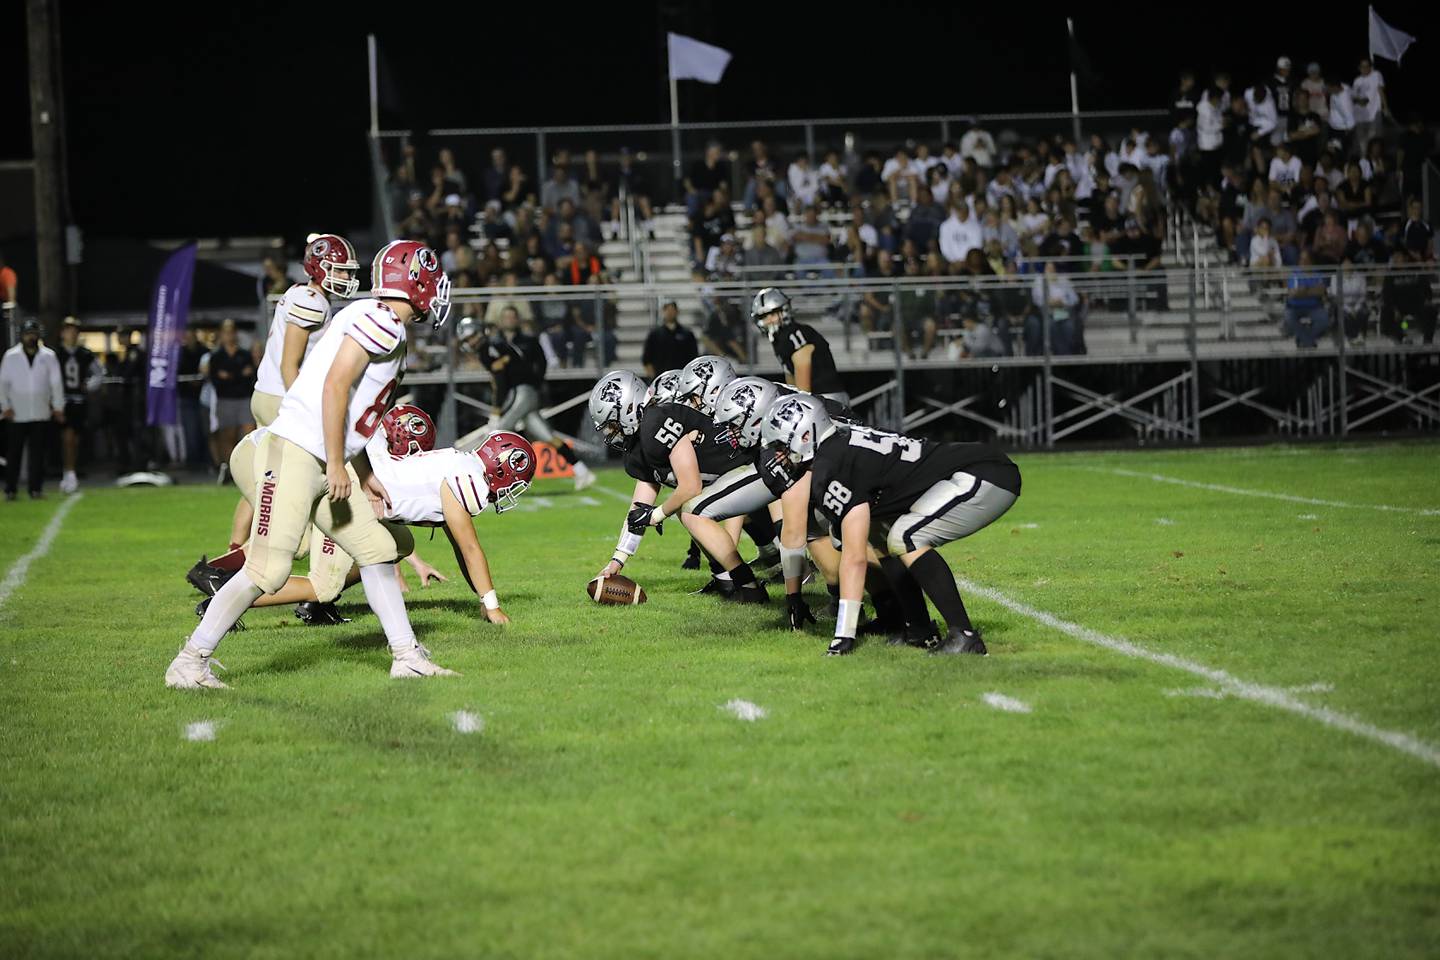 The Morris football team's defense, shown here last week in a 49-35 win over Kaneland, will be tested by Ottawa on Friday night at home.